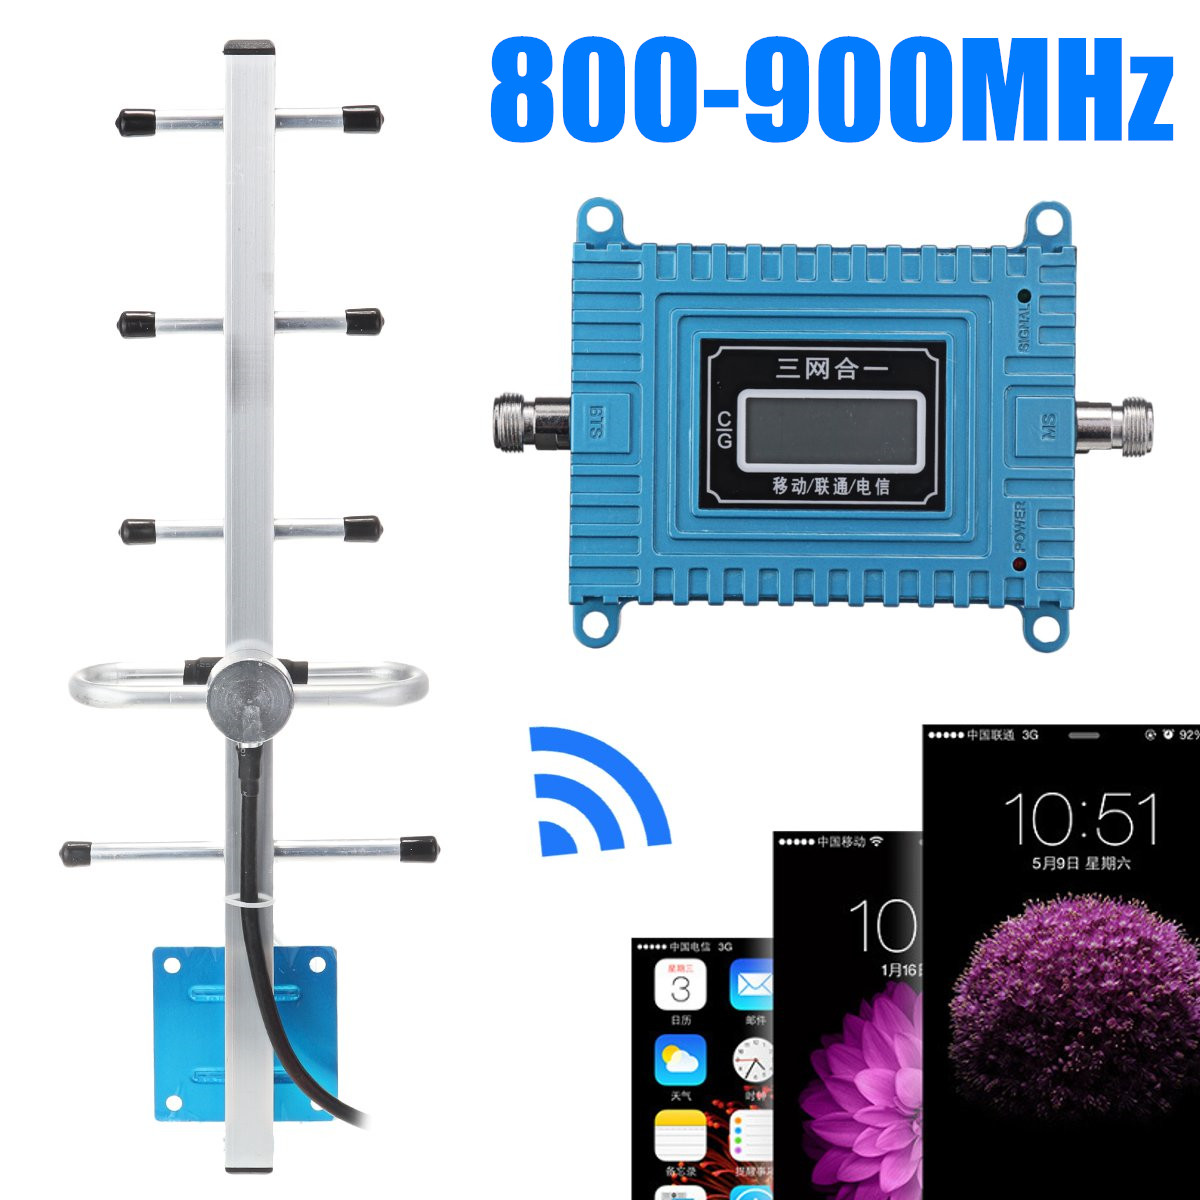 850900MHz-CDMAGSM-Cell-Phone-Signal-Booster-Repeater-Amplifier-Antenna-234G-1860438-2